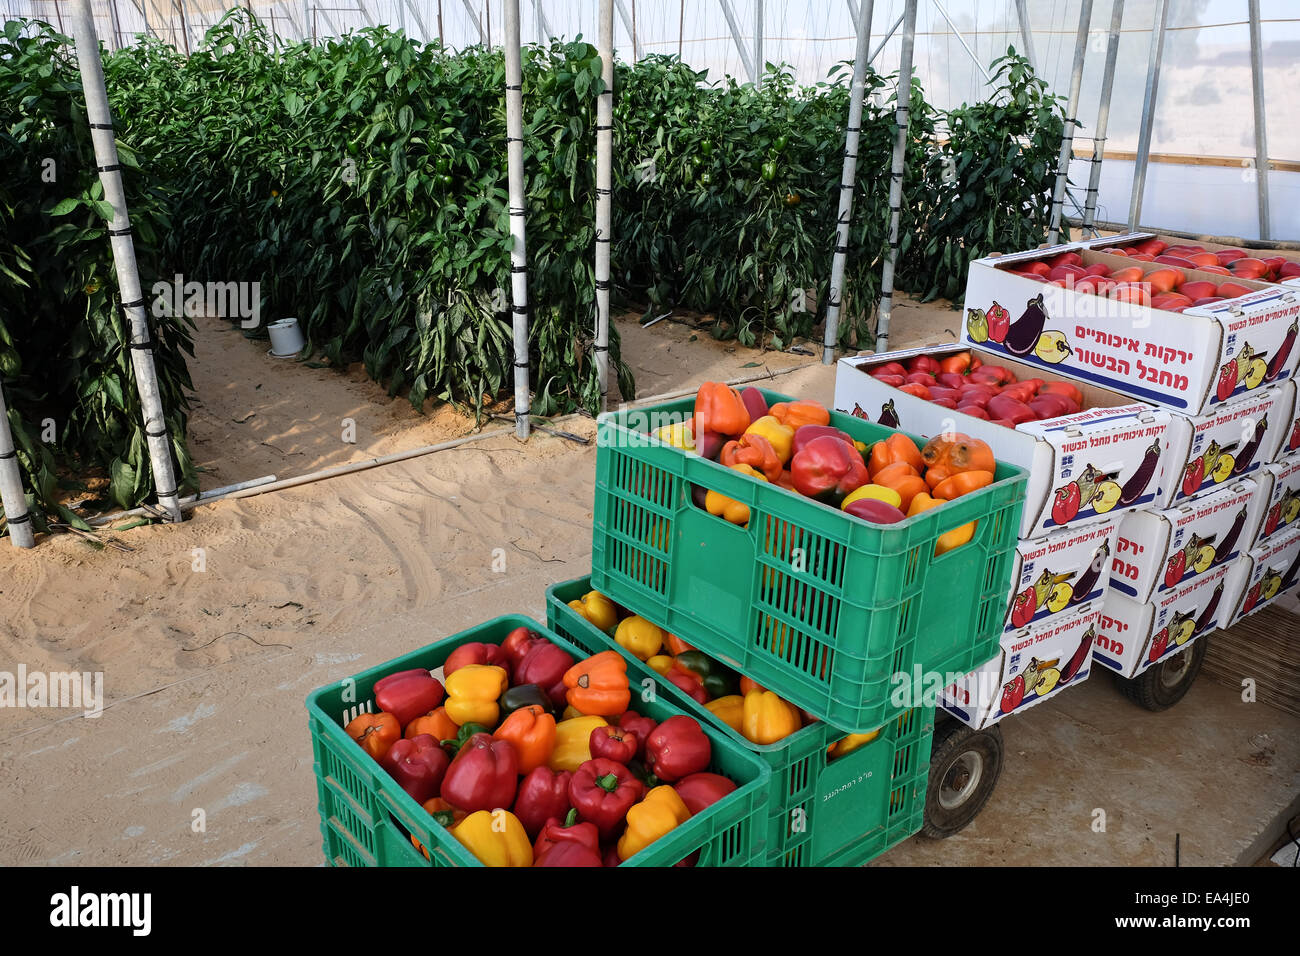 Negev Desert, Israel. 06th Nov, 2014. Peppers are grown in desert sand at the Ramat Negev R&D Center, which develops advanced agriculture methods in the Negev Desert. Due to limited annual rainfall experimental crops are irrigated with saline brackish water from underground aquifers, 800 to 1200 meters deep. The center tests varieties of olives, pomegranates, jojoba, tomatoes, peppers, fresh herbs and ornamental flowers and the feasibility of irrigation with brackish water. Results and knowledge are shared with regional farmers and international academic institutions. © Nir Alon/Alamy Live New Stock Photo